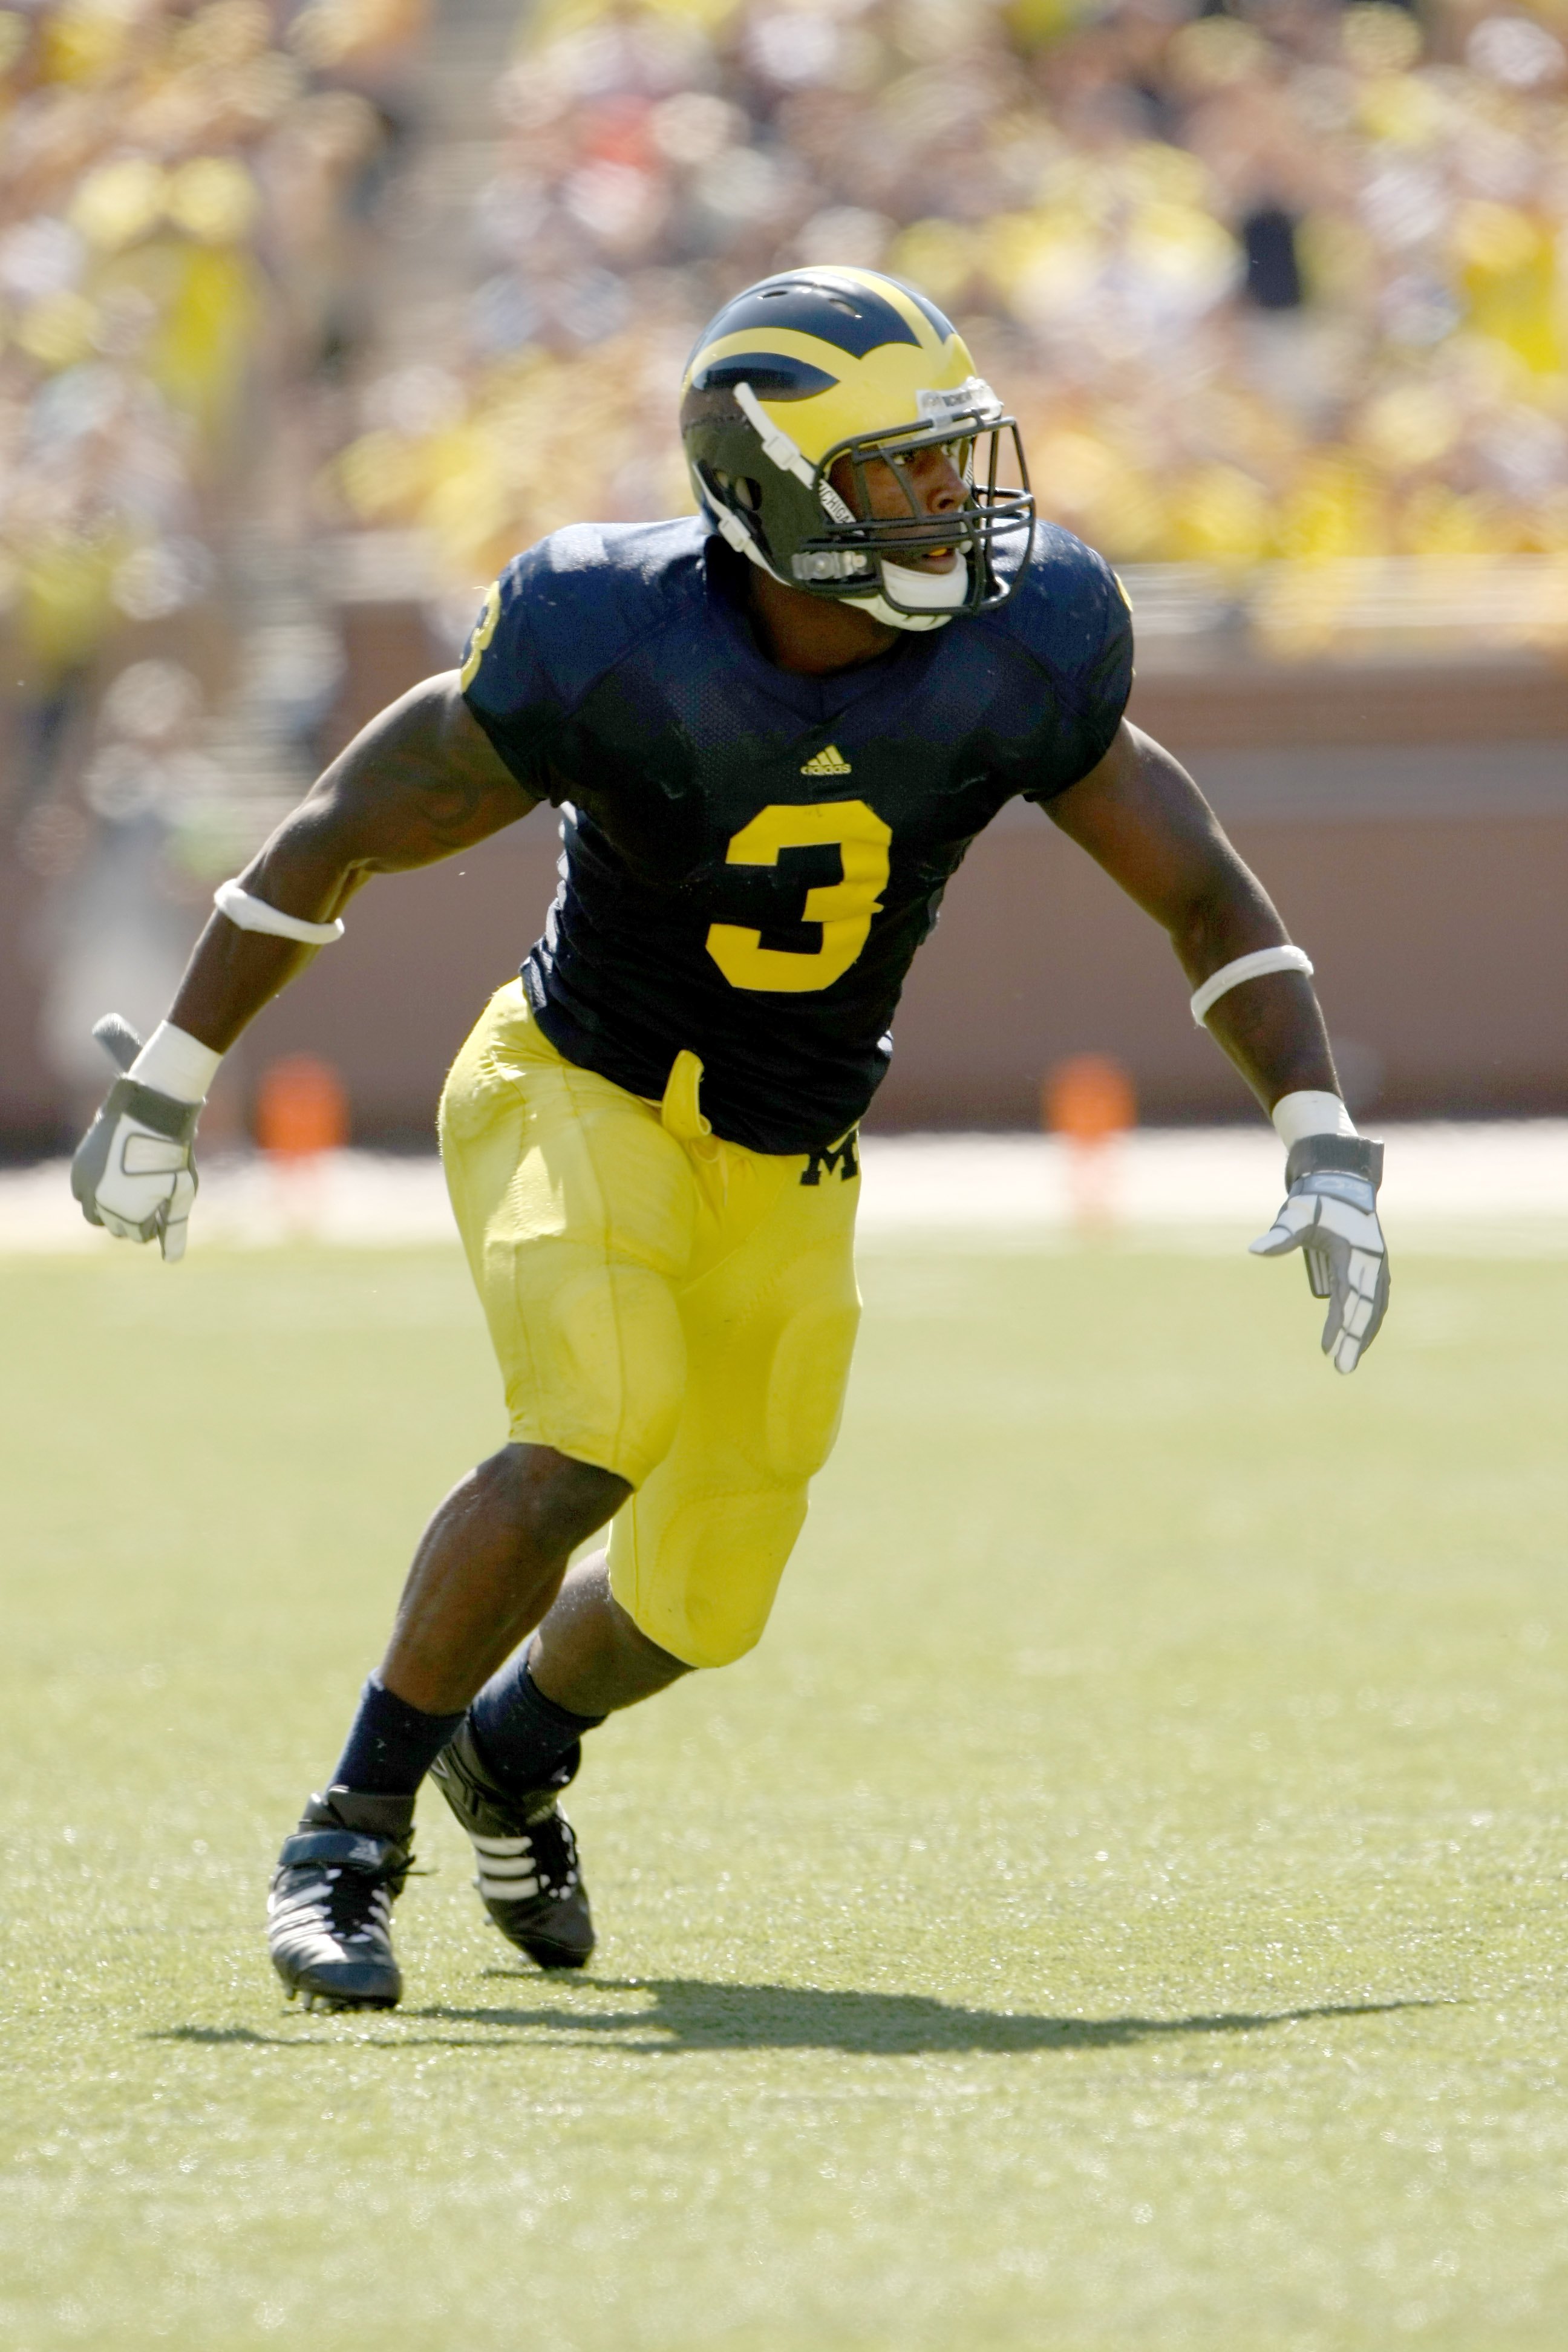 ANN ARBOR, MI - SEPTEMBER 19:  Linebacker Stevie Brown #3 of the Michigan Wolverines sets for a play against the Eastern Michigan Eagles at Michigan Stadium on September 19, 2009 in Ann Arbor, Michigan.  Michigan won 45-17.  (Photo by Stephen Dunn/Getty I